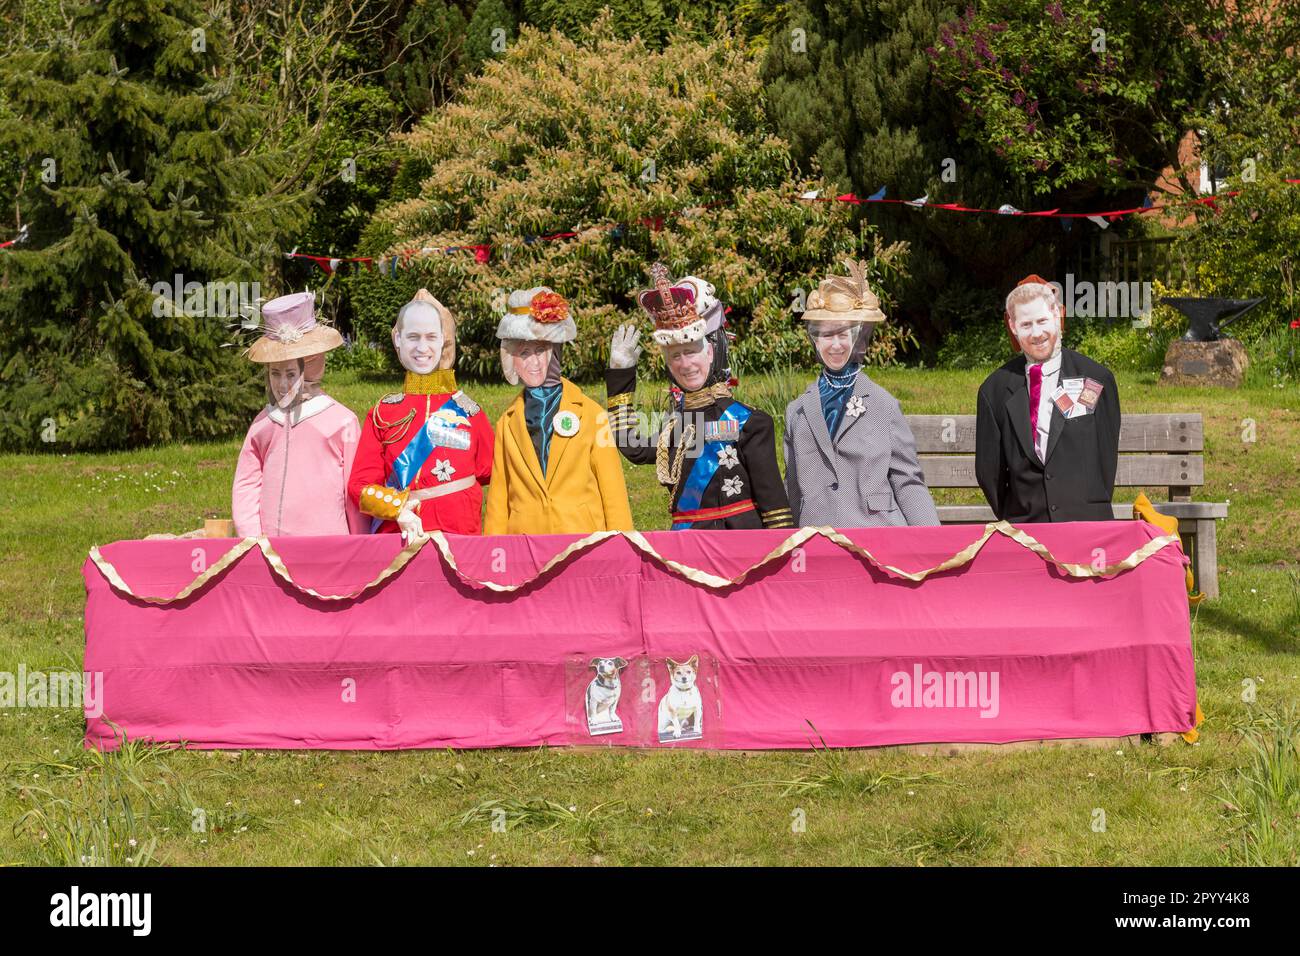 To celebrate the coronation of King Charles III, in Sheriffhales, Shropshire, UK, the village has prepared a mockup of the famous Buckingham Palace balcony complete with life-size models of the royal family, but without Meghan. Harry is shown with his passport and first-class boarding cards. Stock Photo